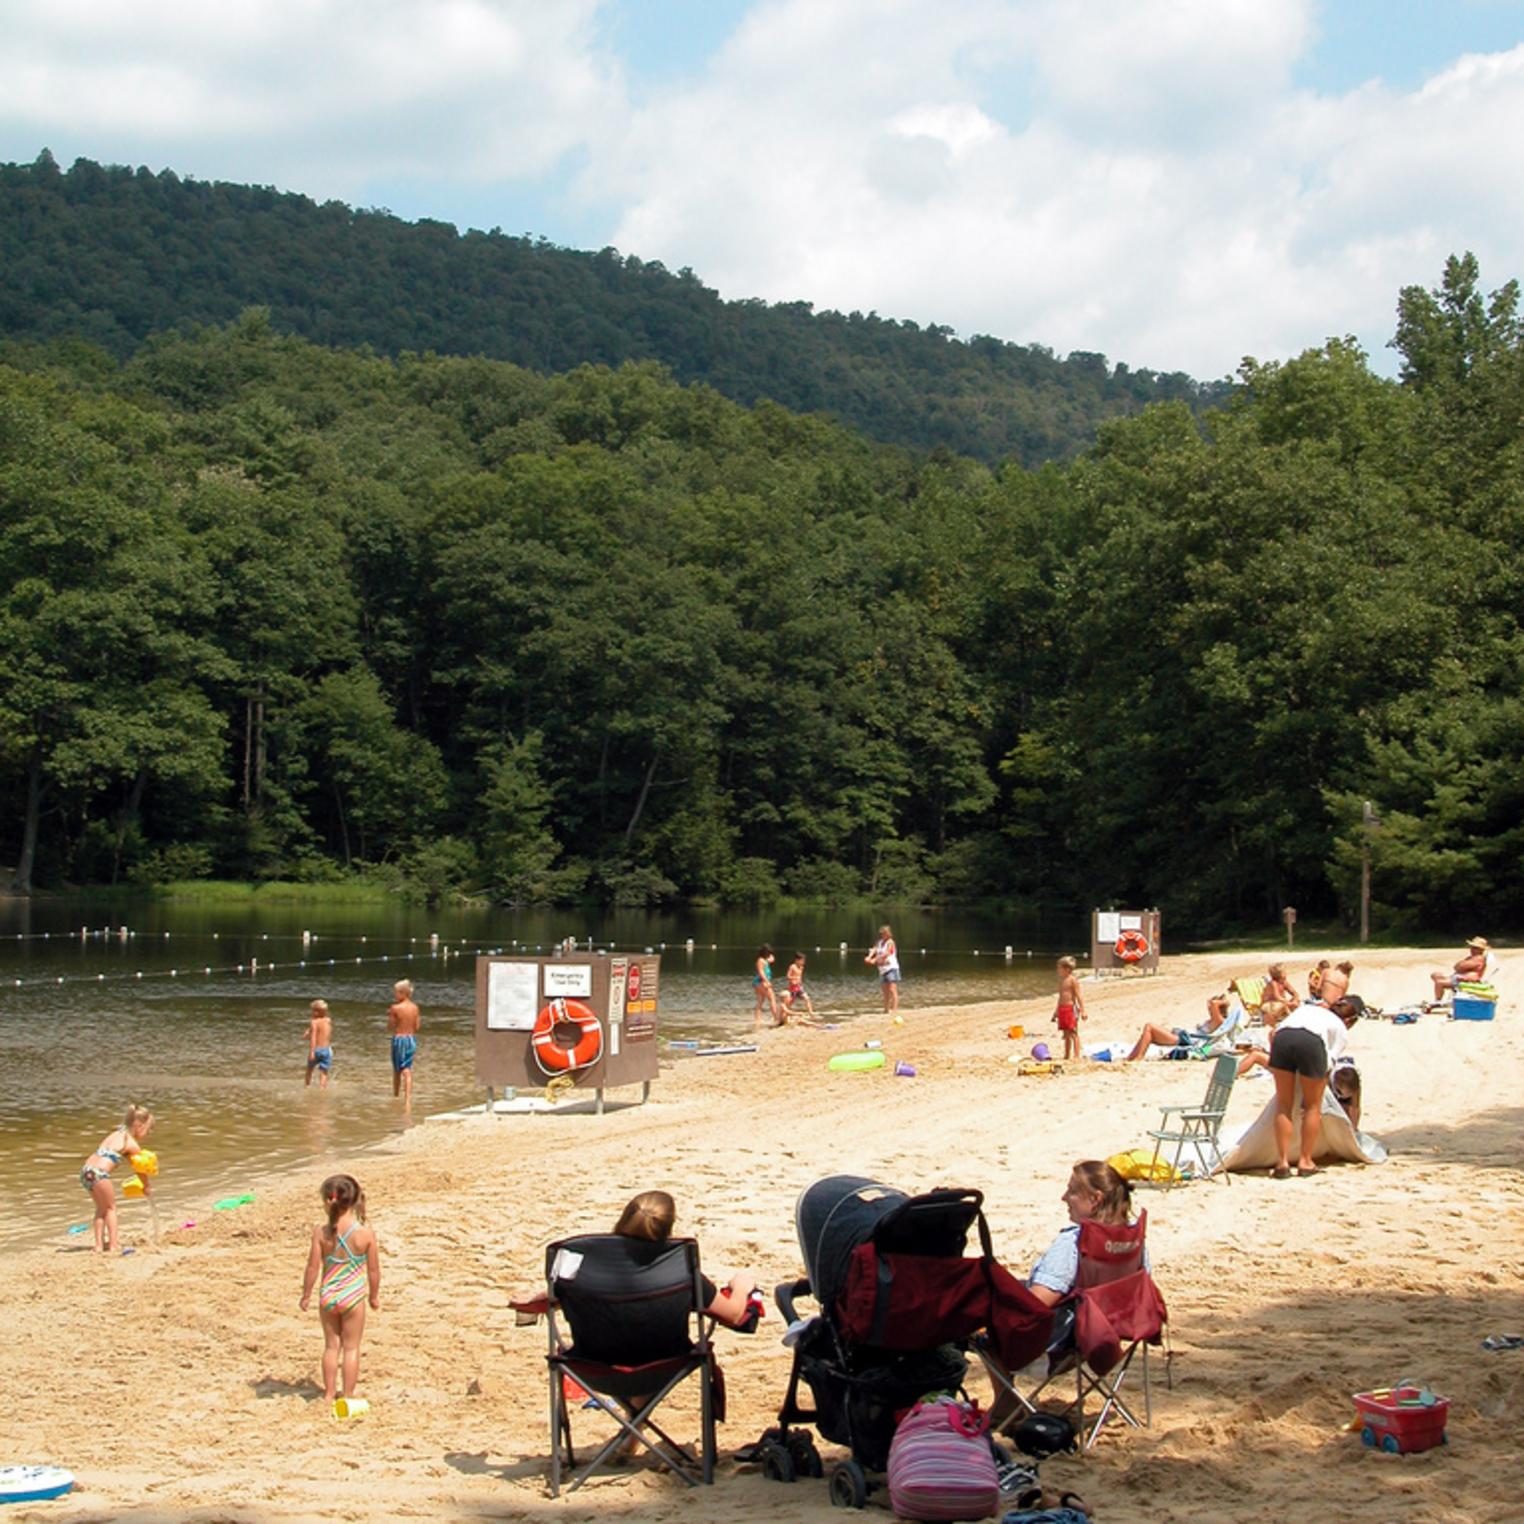 Beach at Doubling Gap Lake in Colonel Denning State Park